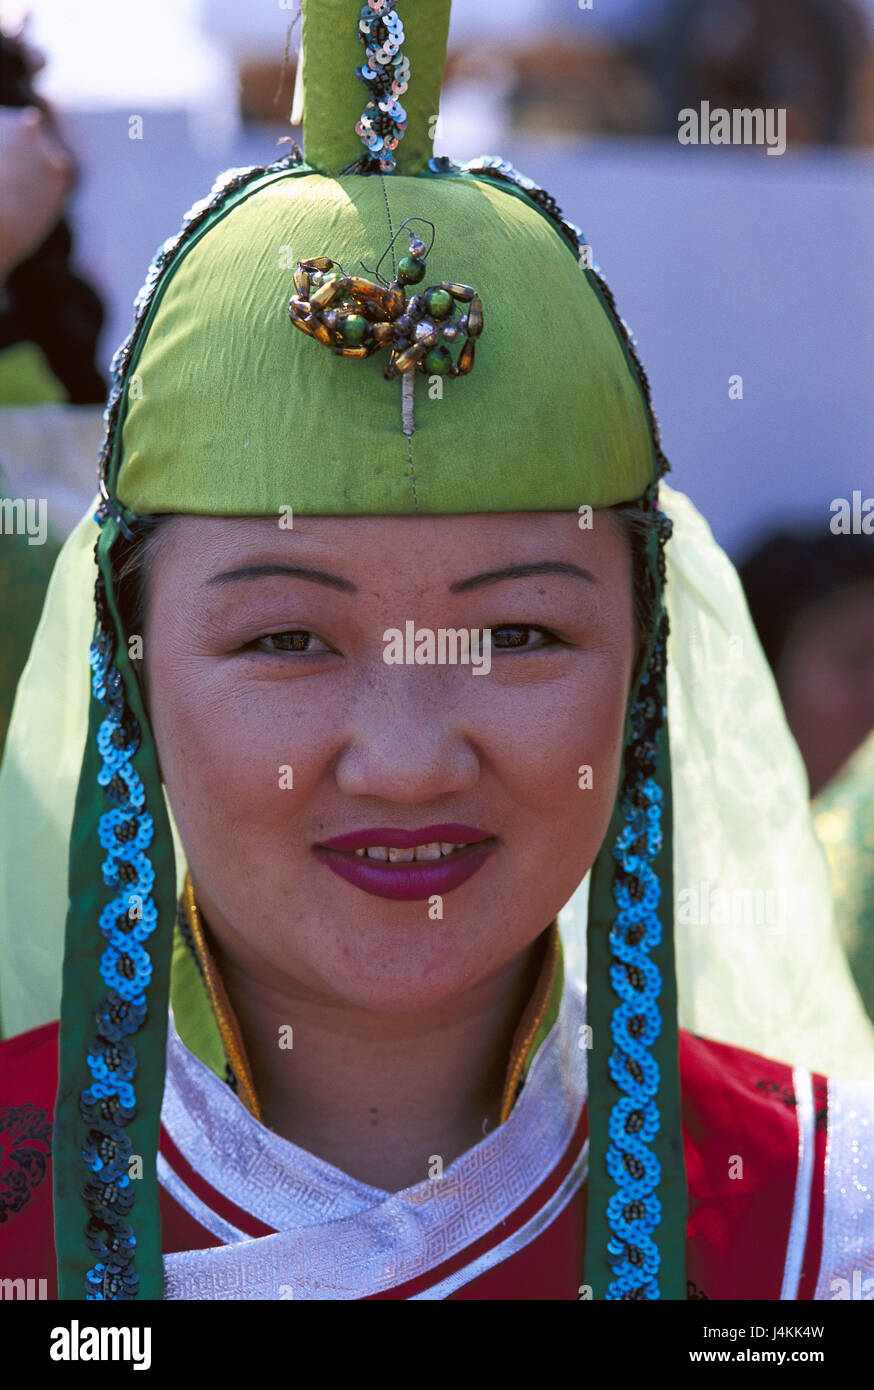 Mongolia, Ulan Bator, Naadam feast, woman, holiday national costume, portrait no model release Central Asia, local, Mongol, national costume, folklore, folklore clothes, headgear, view camera, smile, holiday national costume, tradition, traditions, feast, Staatsnaadam, event, summer Stock Photo